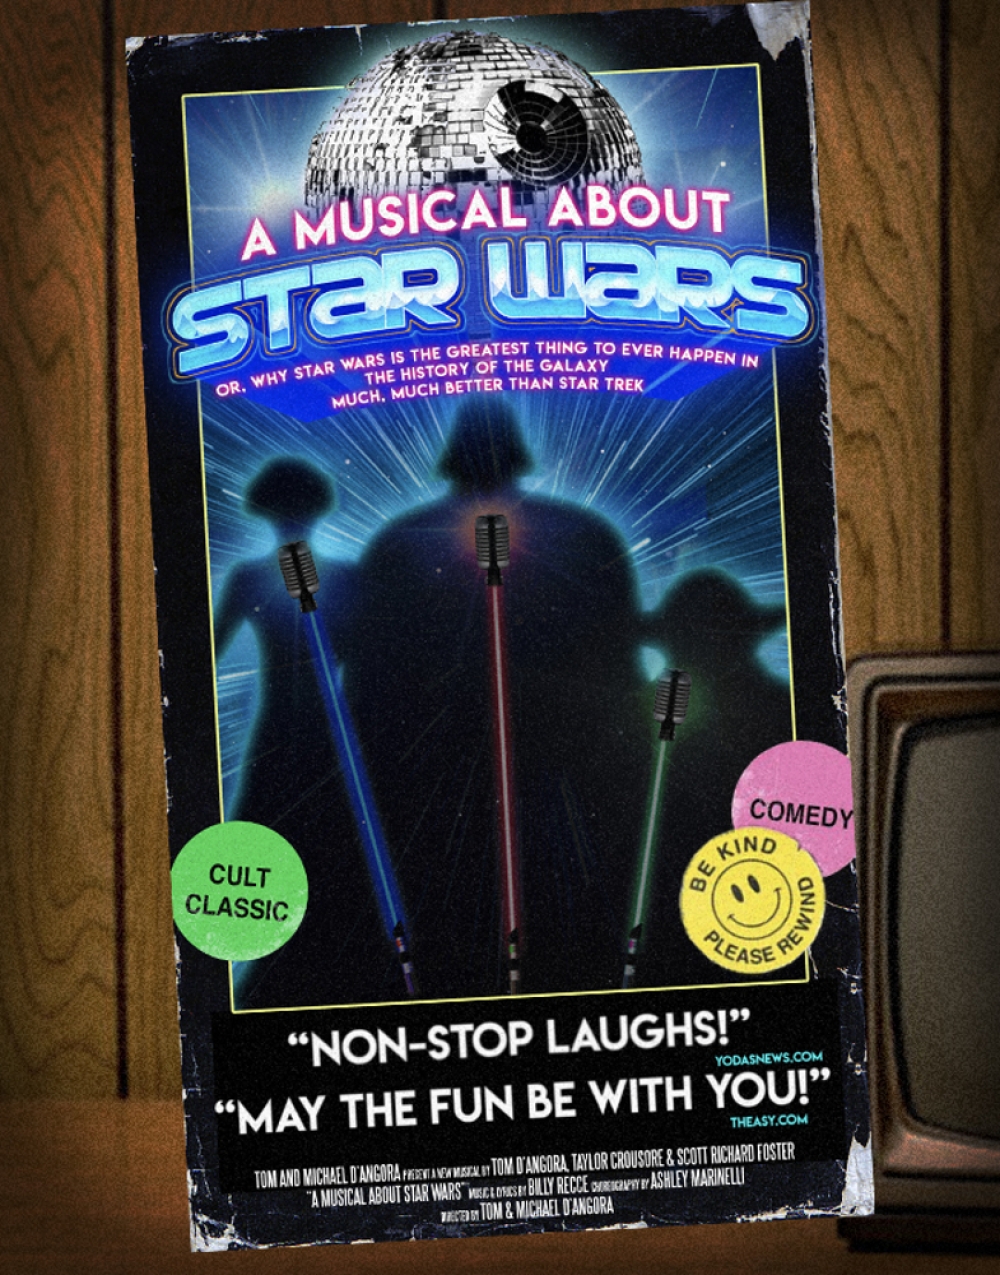 A Musical About Star Wars at The V Theater